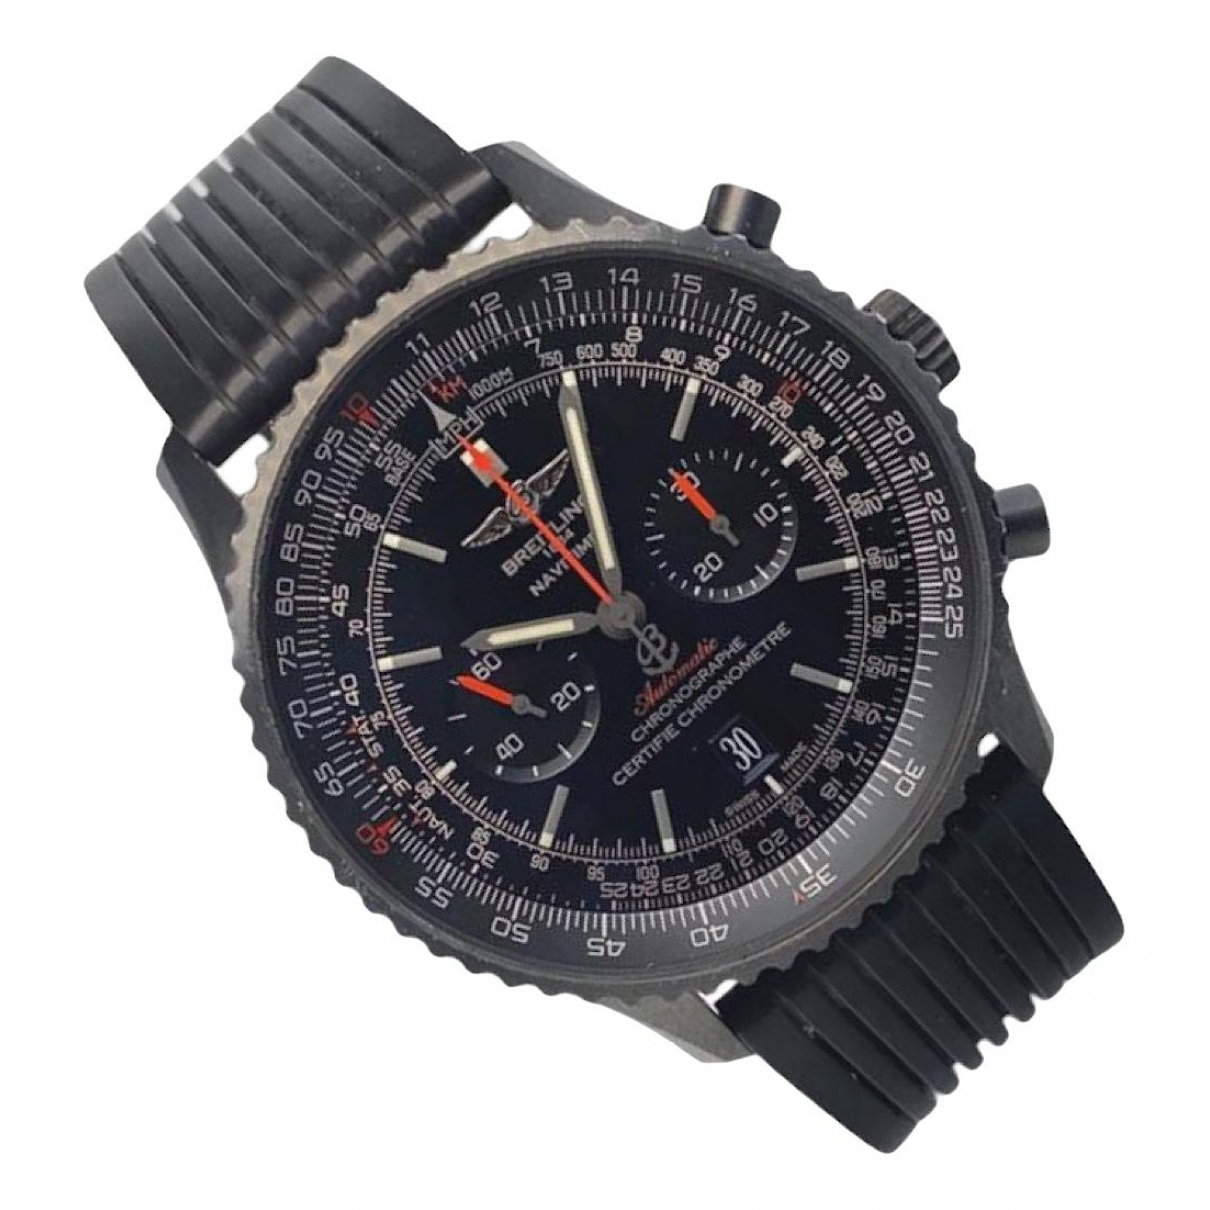 image of Breitling Navitimer watch